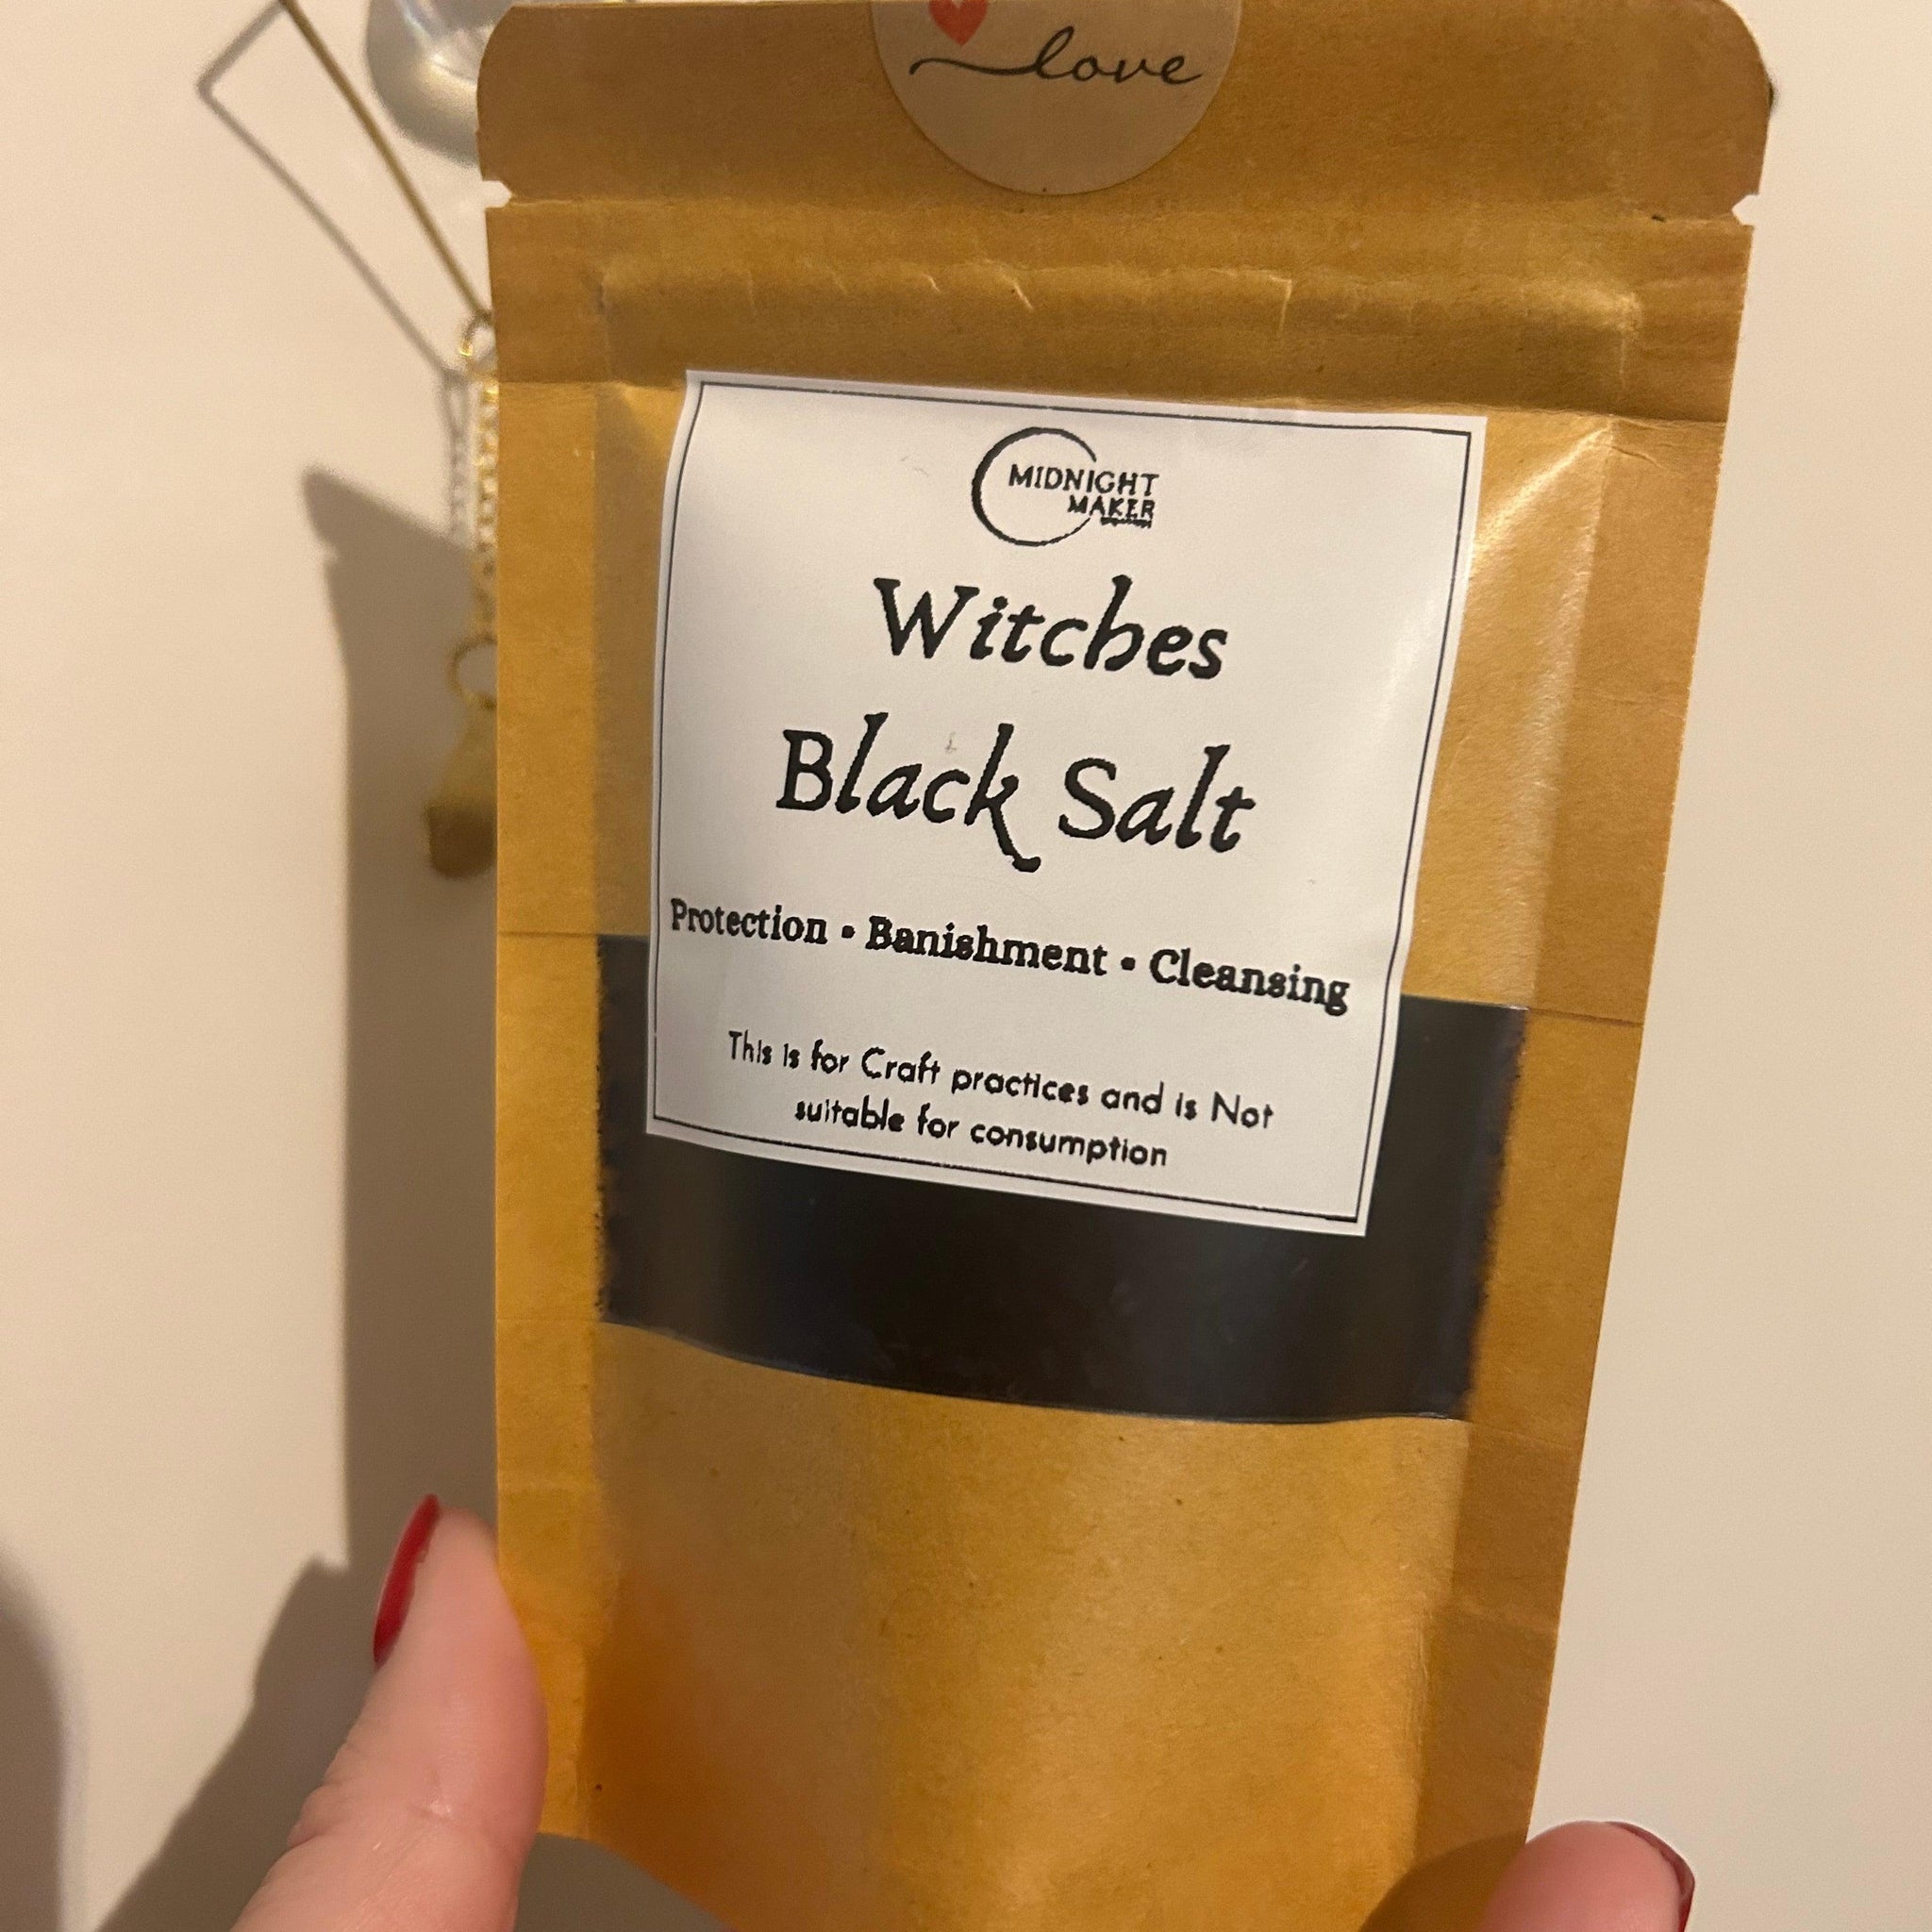 Witches black salt for protection, cleansing and banishment 